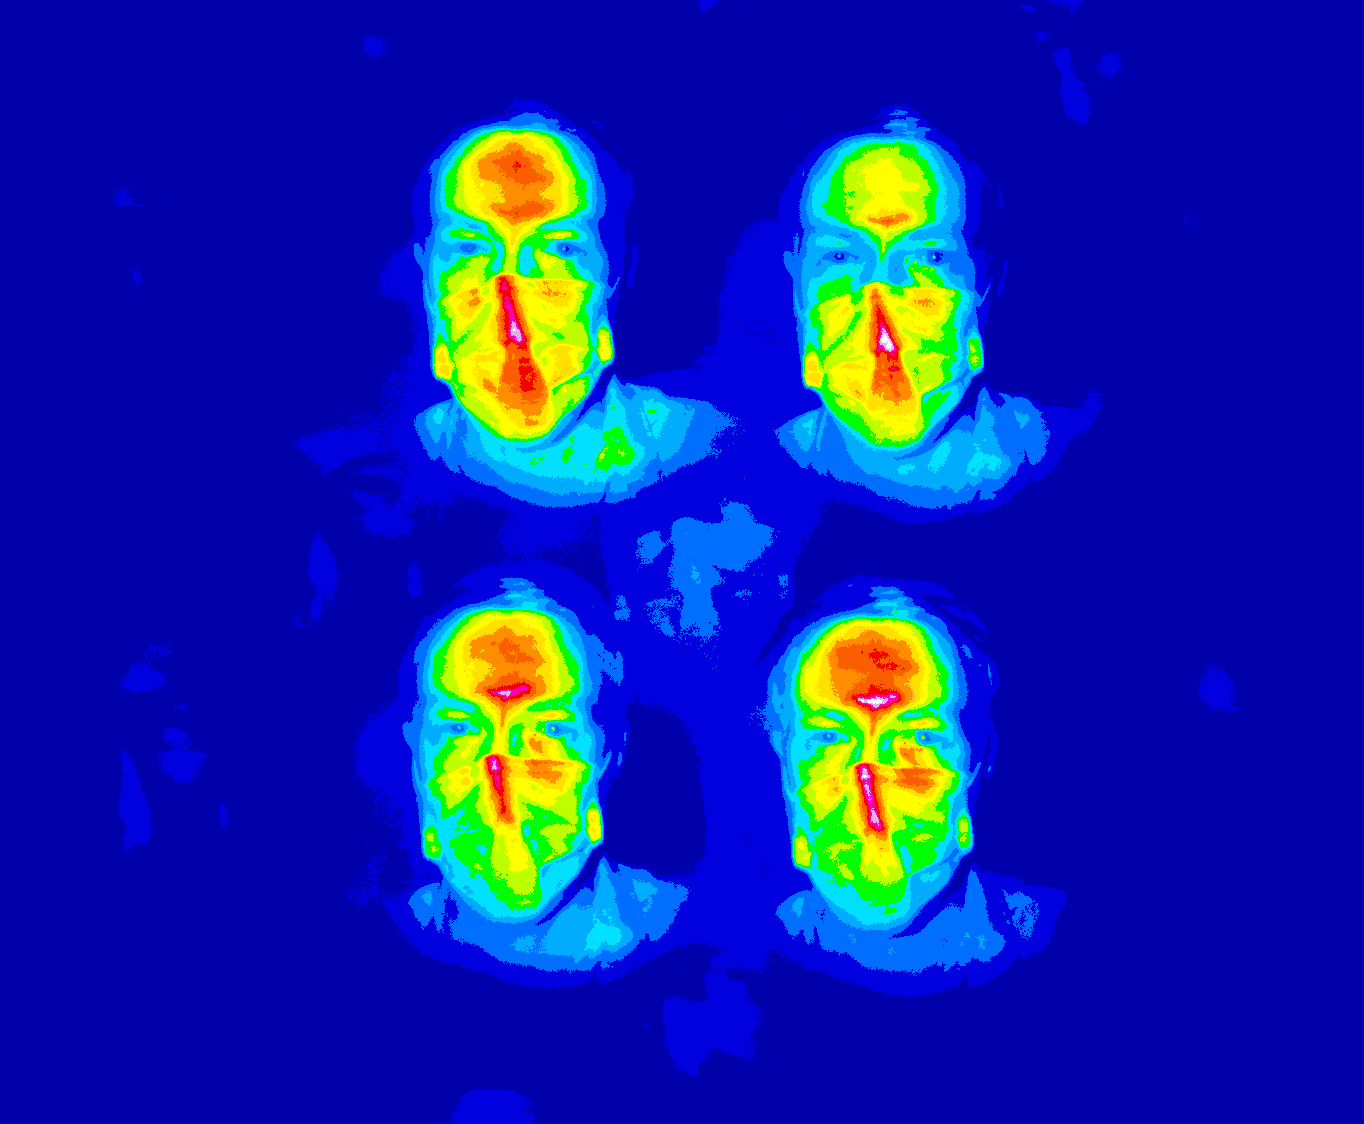 Polarized light is split into 4 streams, showing different details of a face.